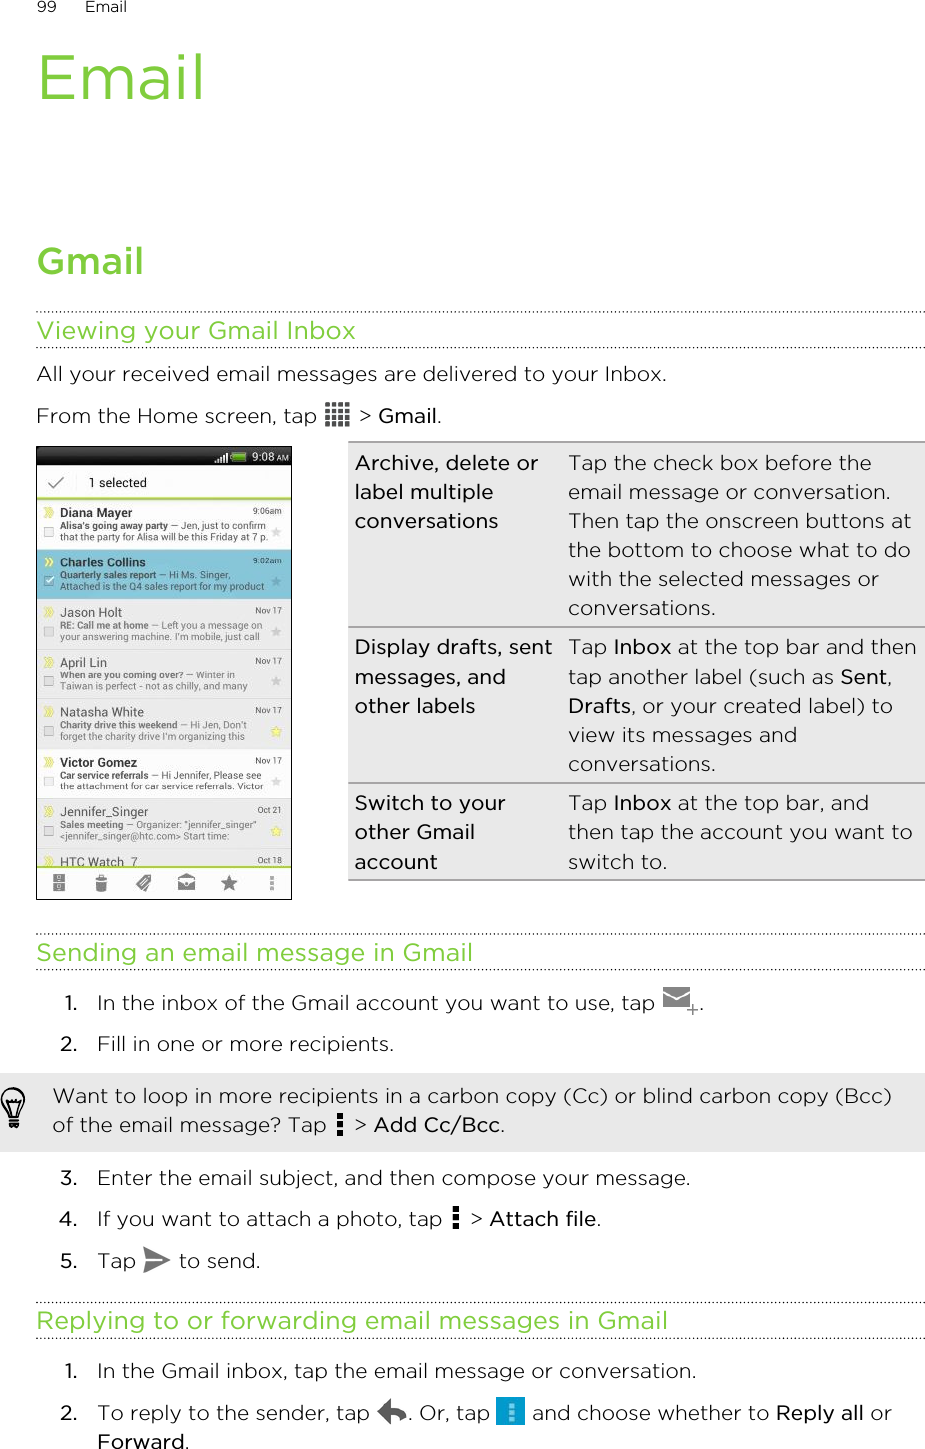 EmailGmailViewing your Gmail InboxAll your received email messages are delivered to your Inbox.From the Home screen, tap   &gt; Gmail. Archive, delete orlabel multipleconversationsTap the check box before theemail message or conversation.Then tap the onscreen buttons atthe bottom to choose what to dowith the selected messages orconversations.Display drafts, sentmessages, andother labelsTap Inbox at the top bar and thentap another label (such as Sent,Drafts, or your created label) toview its messages andconversations.Switch to yourother GmailaccountTap Inbox at the top bar, andthen tap the account you want toswitch to.Sending an email message in Gmail1. In the inbox of the Gmail account you want to use, tap  .2. Fill in one or more recipients. Want to loop in more recipients in a carbon copy (Cc) or blind carbon copy (Bcc)of the email message? Tap   &gt; Add Cc/Bcc.3. Enter the email subject, and then compose your message.4. If you want to attach a photo, tap   &gt; Attach file.5. Tap   to send.Replying to or forwarding email messages in Gmail1. In the Gmail inbox, tap the email message or conversation.2. To reply to the sender, tap  . Or, tap   and choose whether to Reply all orForward.99 Email